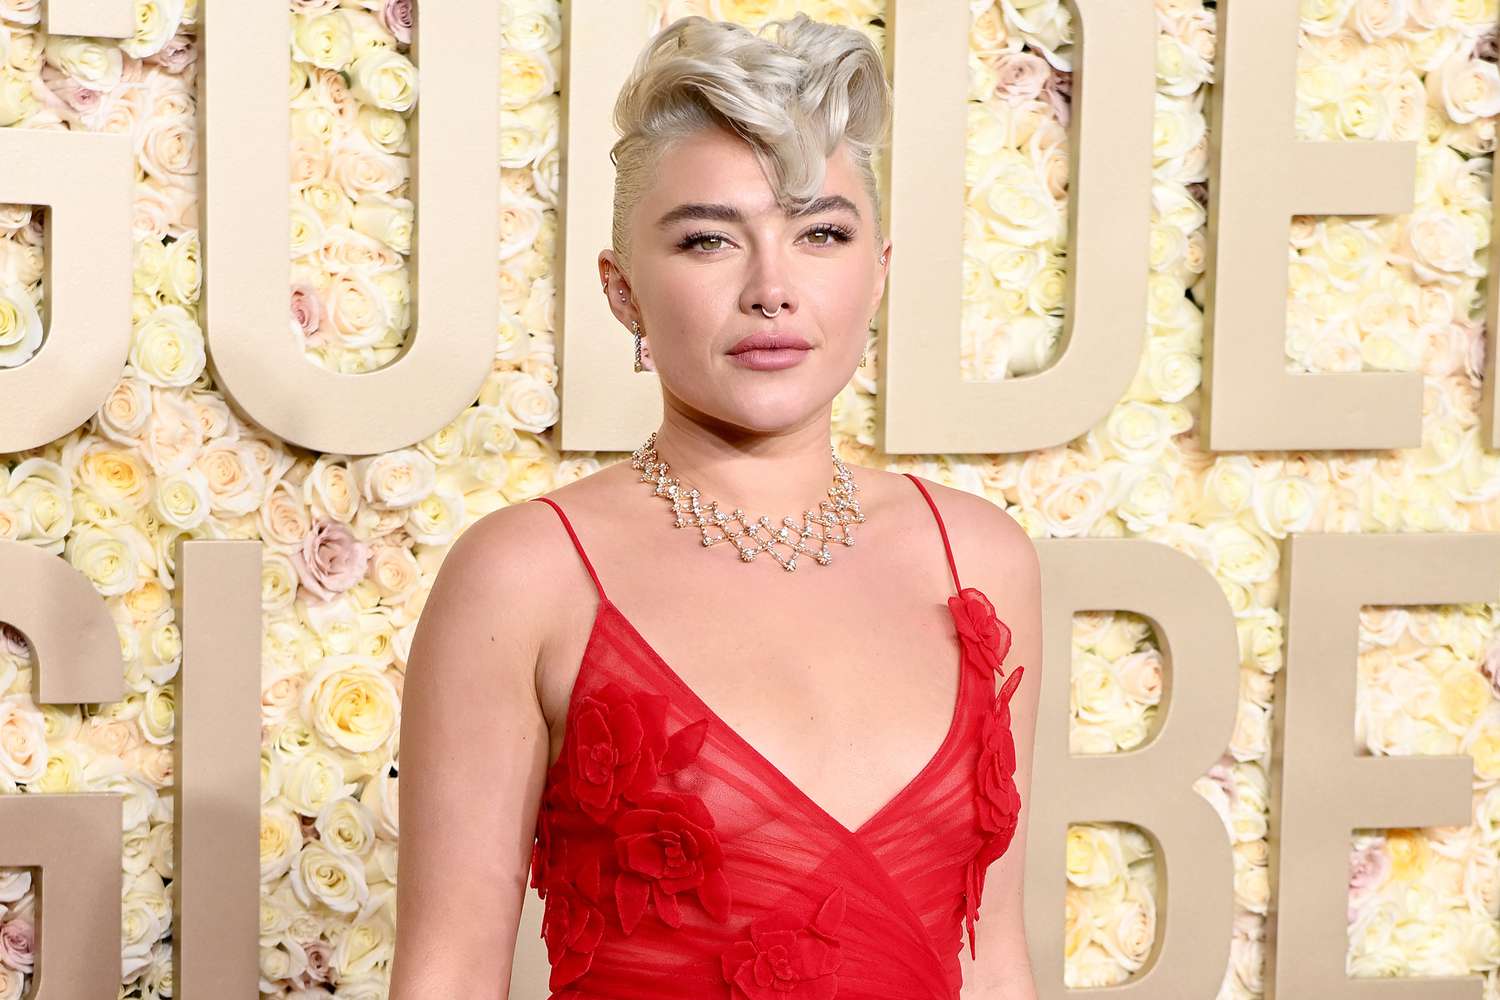 Florence Pugh wearing a red dress